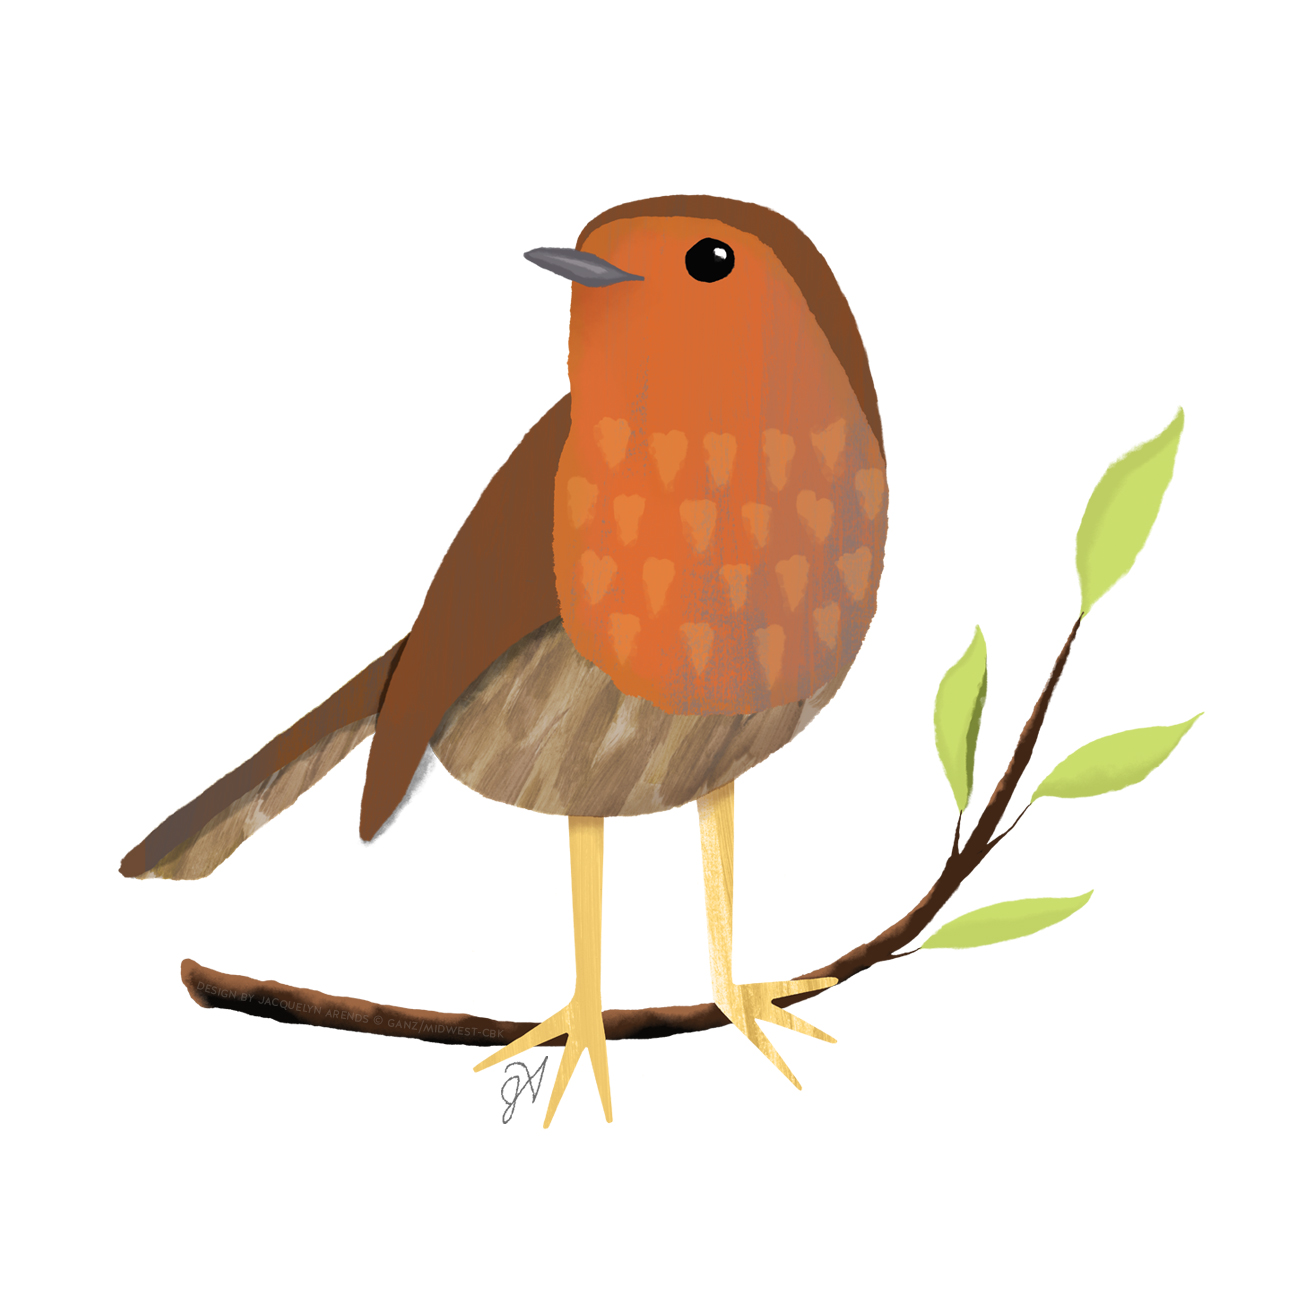 Contemporary Garden winter robin designed by Jacquelyn Arends; © Ganz/Midwest-CBK